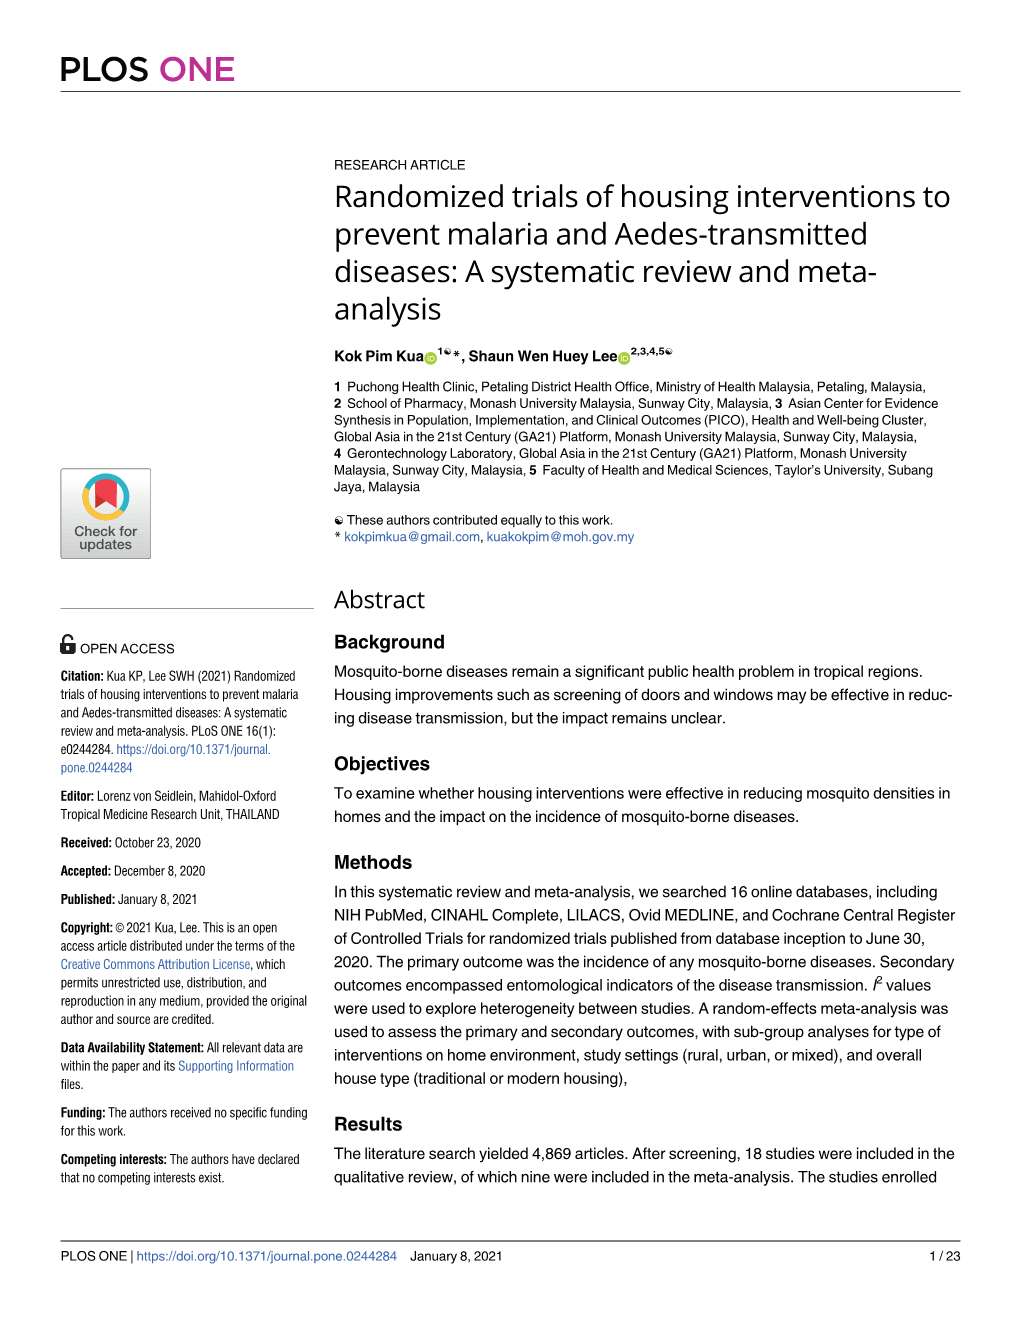 Randomized Trials of Housing Interventions to Prevent Malaria and Aedes-Transmitted Diseases: a Systematic Review and Meta- Analysis